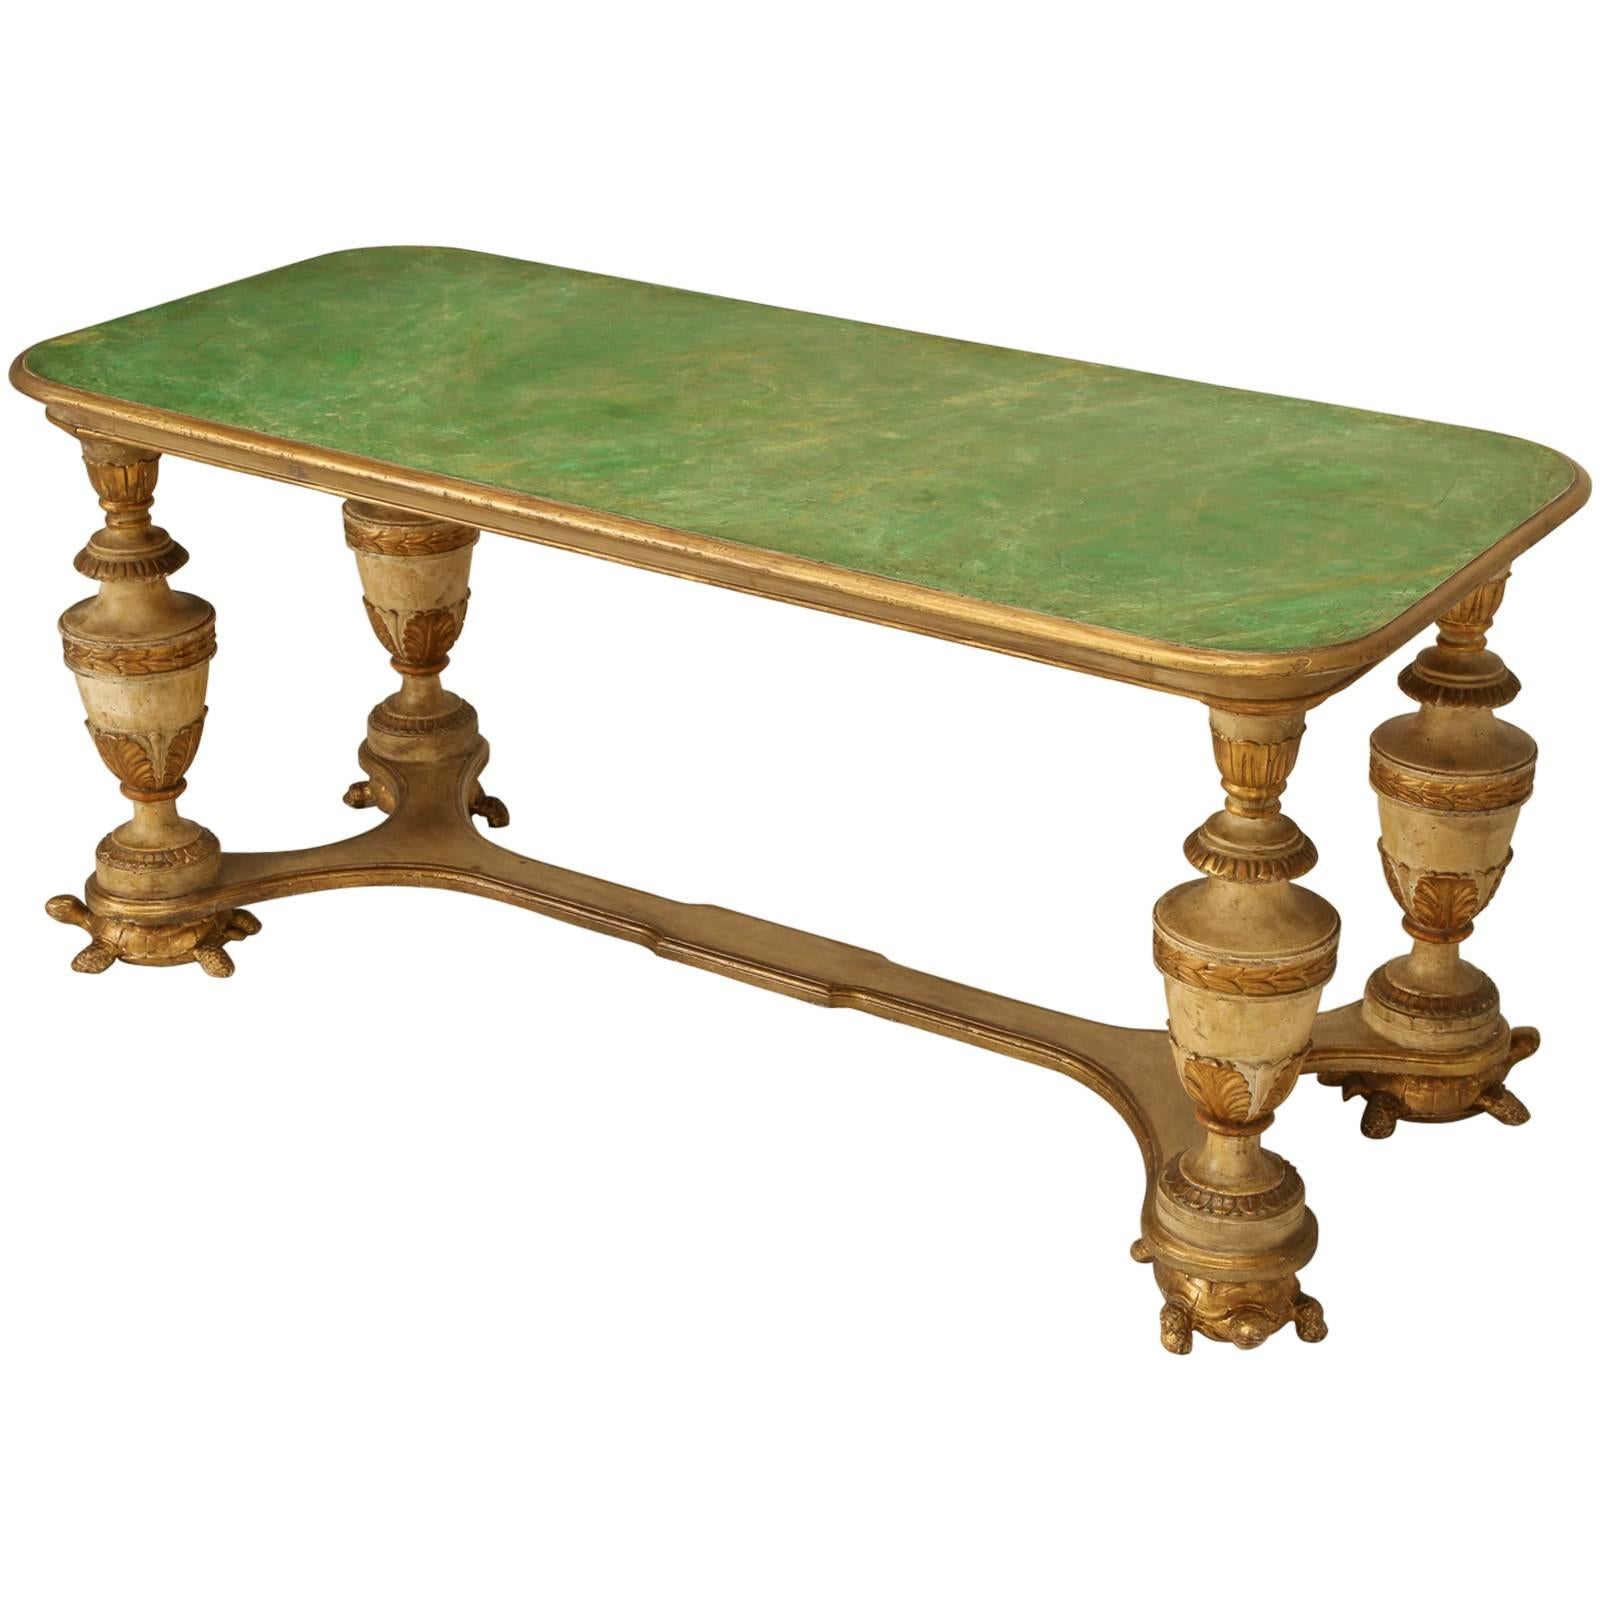 Italian Desk, or Library Table with Turtles